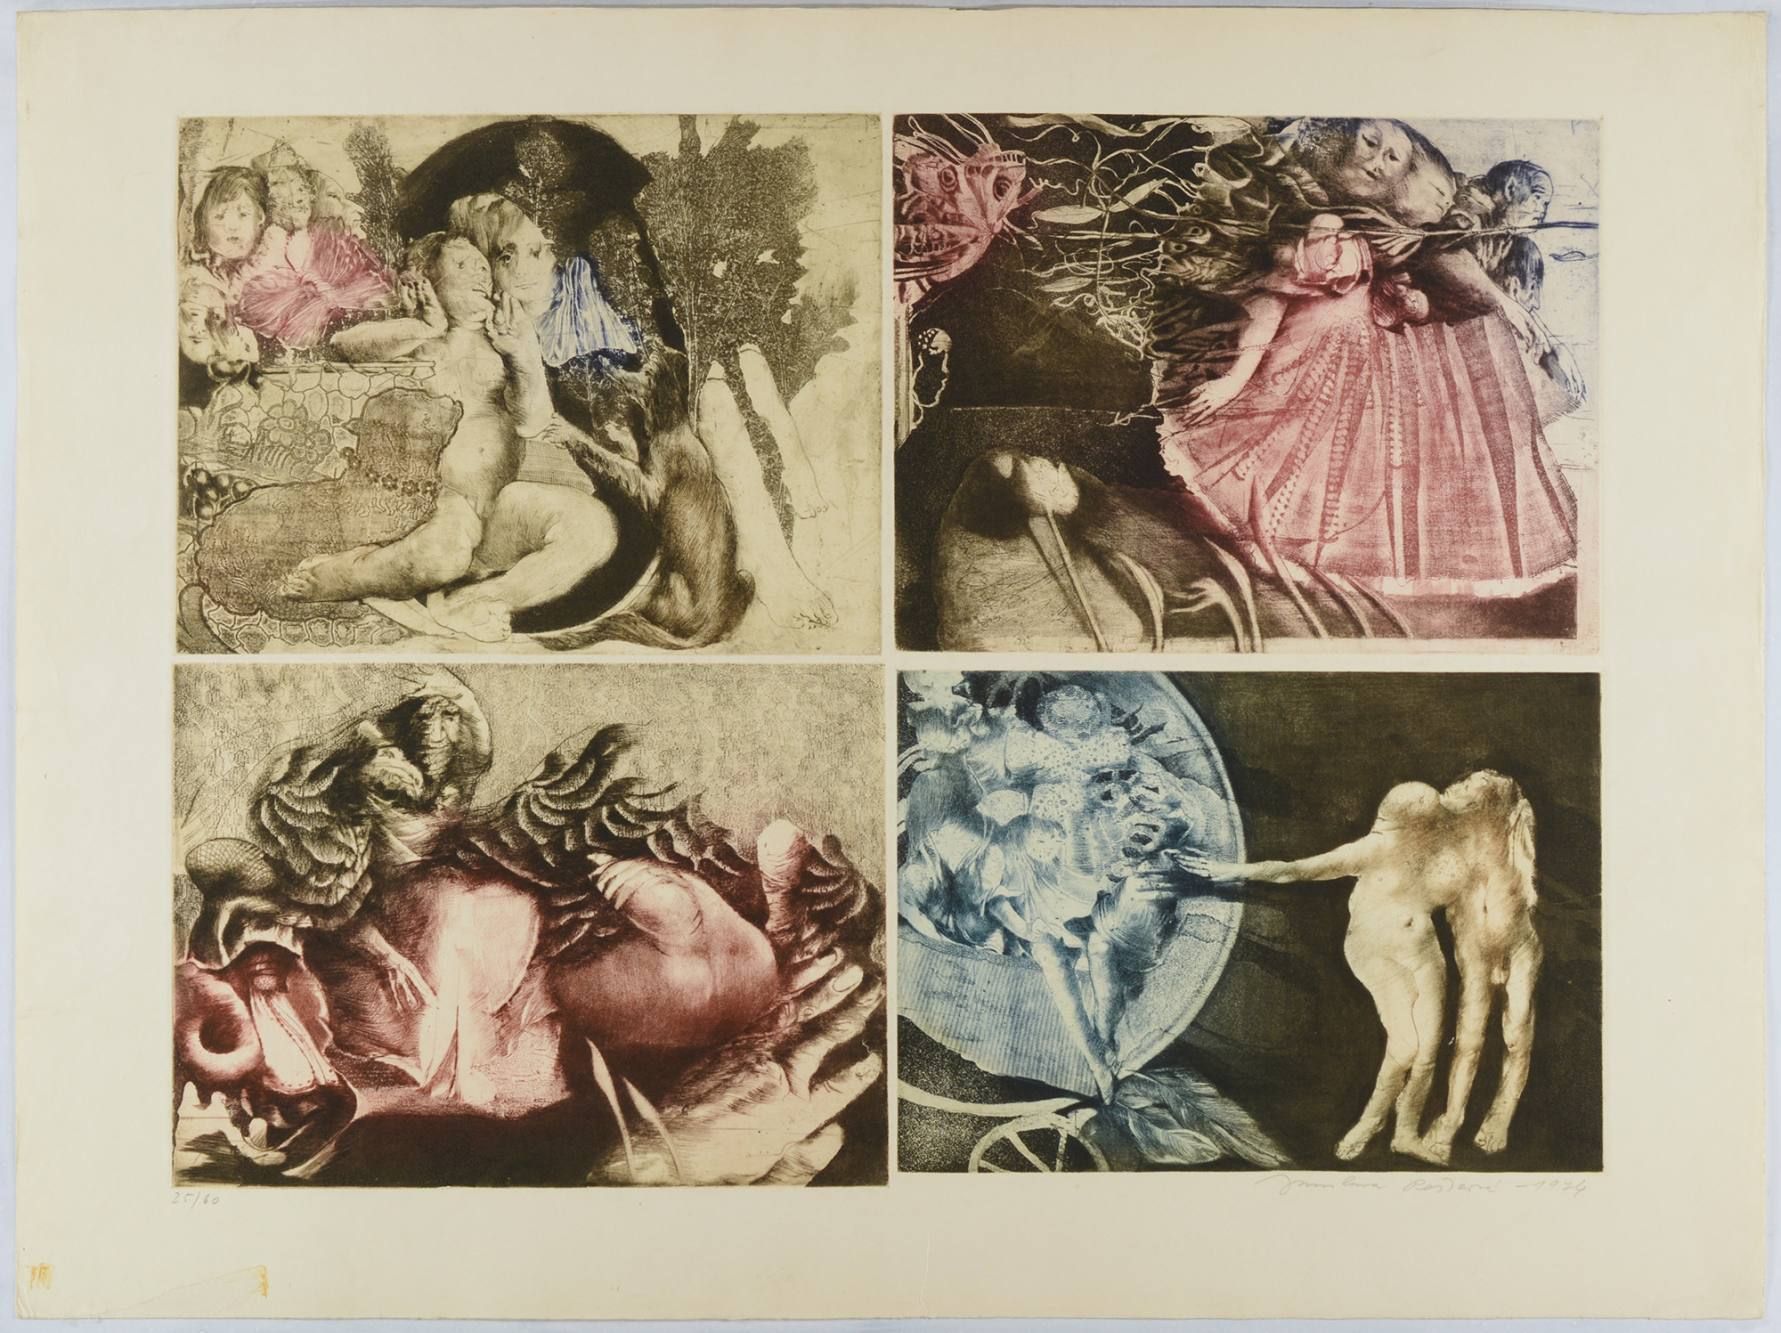 Jaroslava Pesicova (1935-2015) FOUR ETCHINGS

1974

Four color etchings on a sin&hellip;